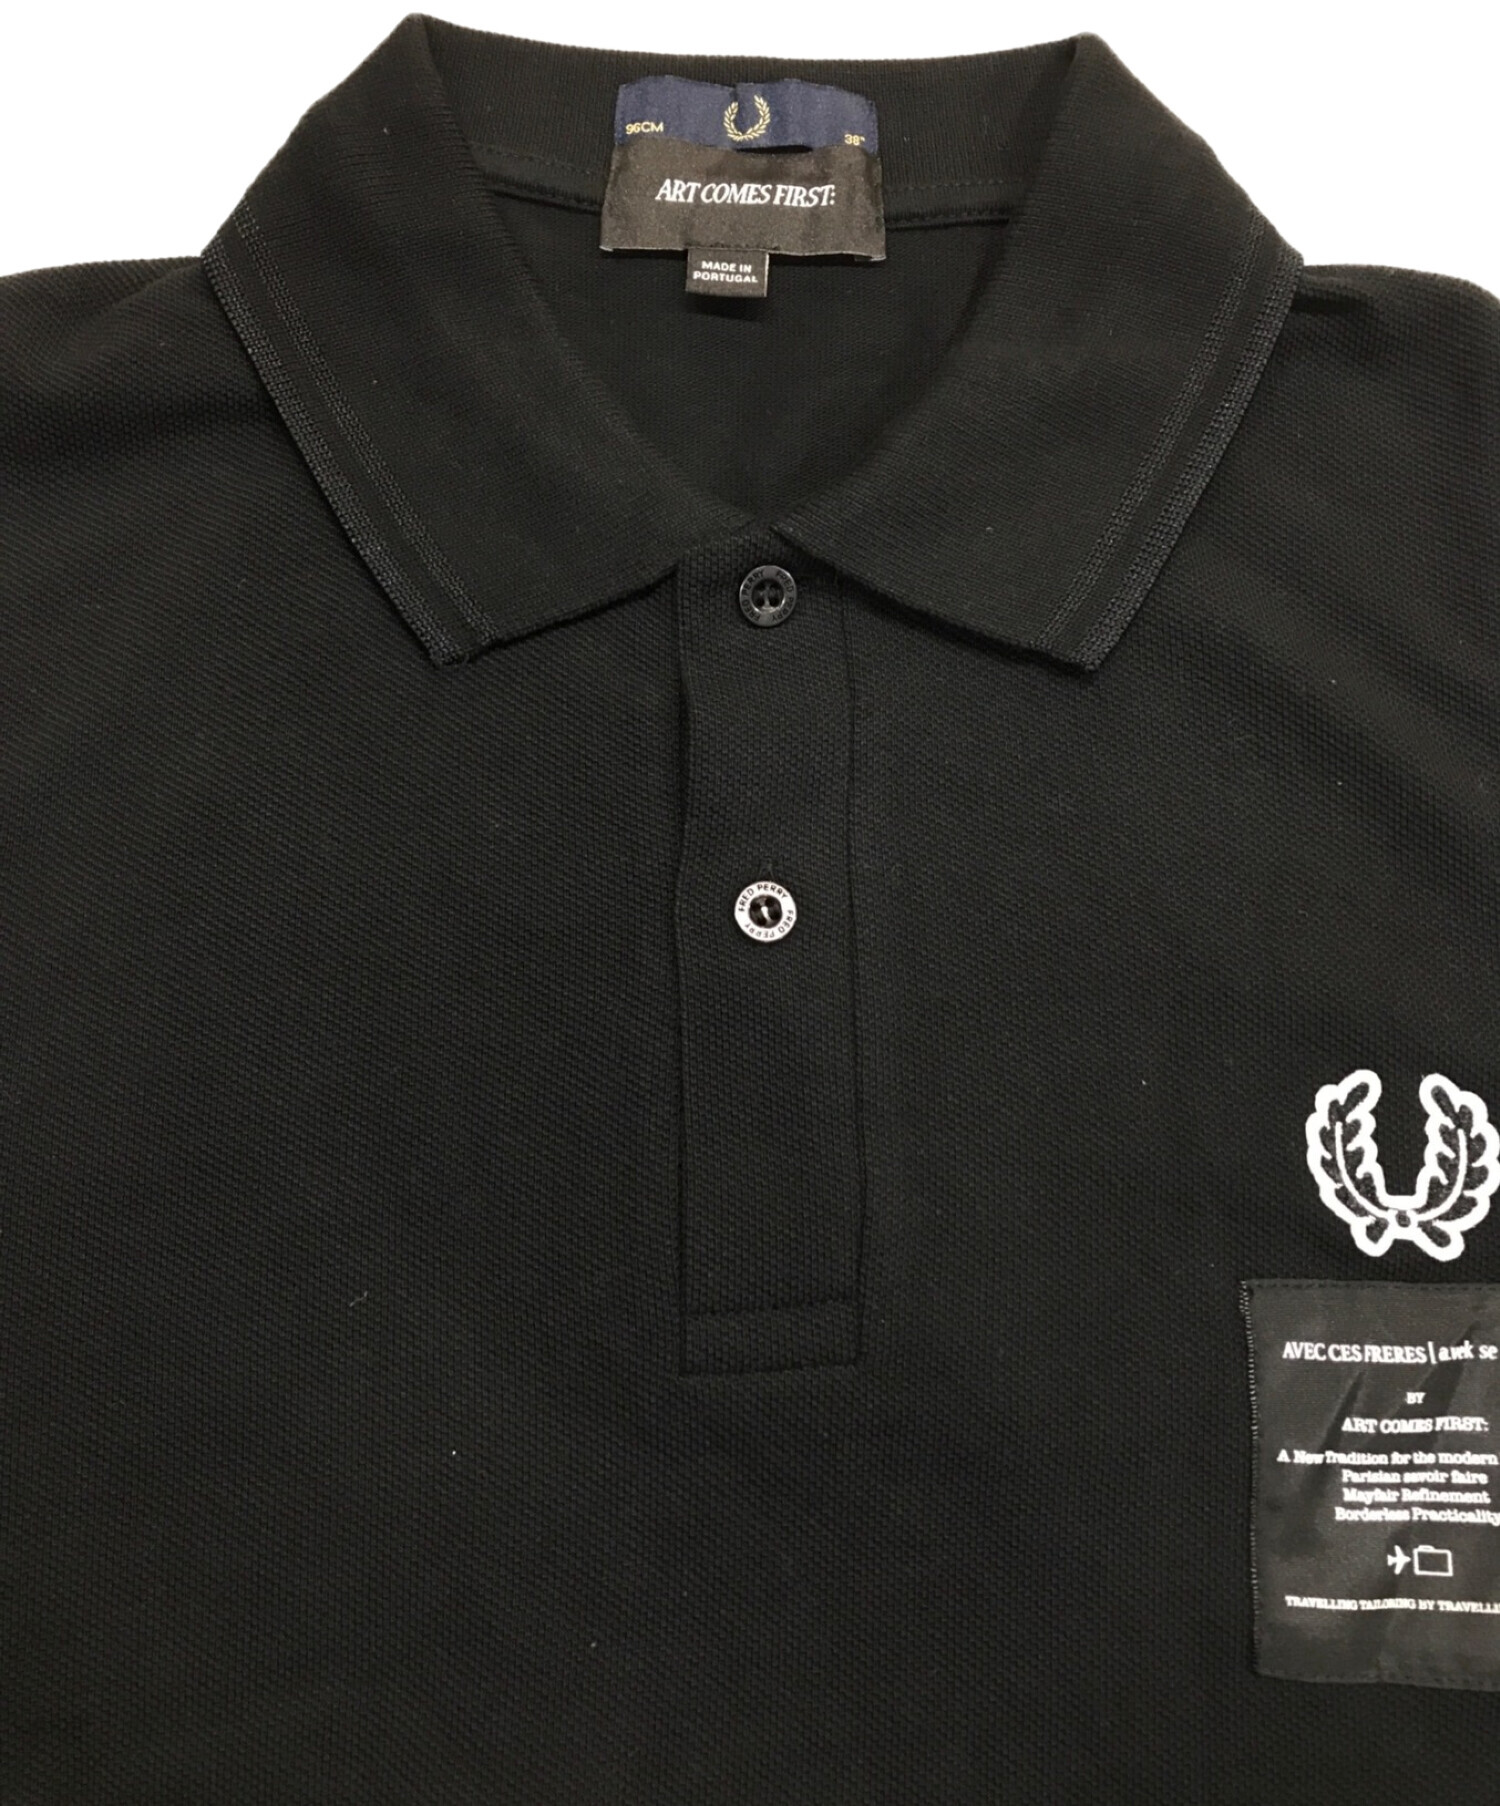 FRED PERRY×ART COMES FIRST (フレッドペリー×アートカムズファースト) ART COMES FIRST TAPED  PIQUE SHIRT ブラック サイズ:38